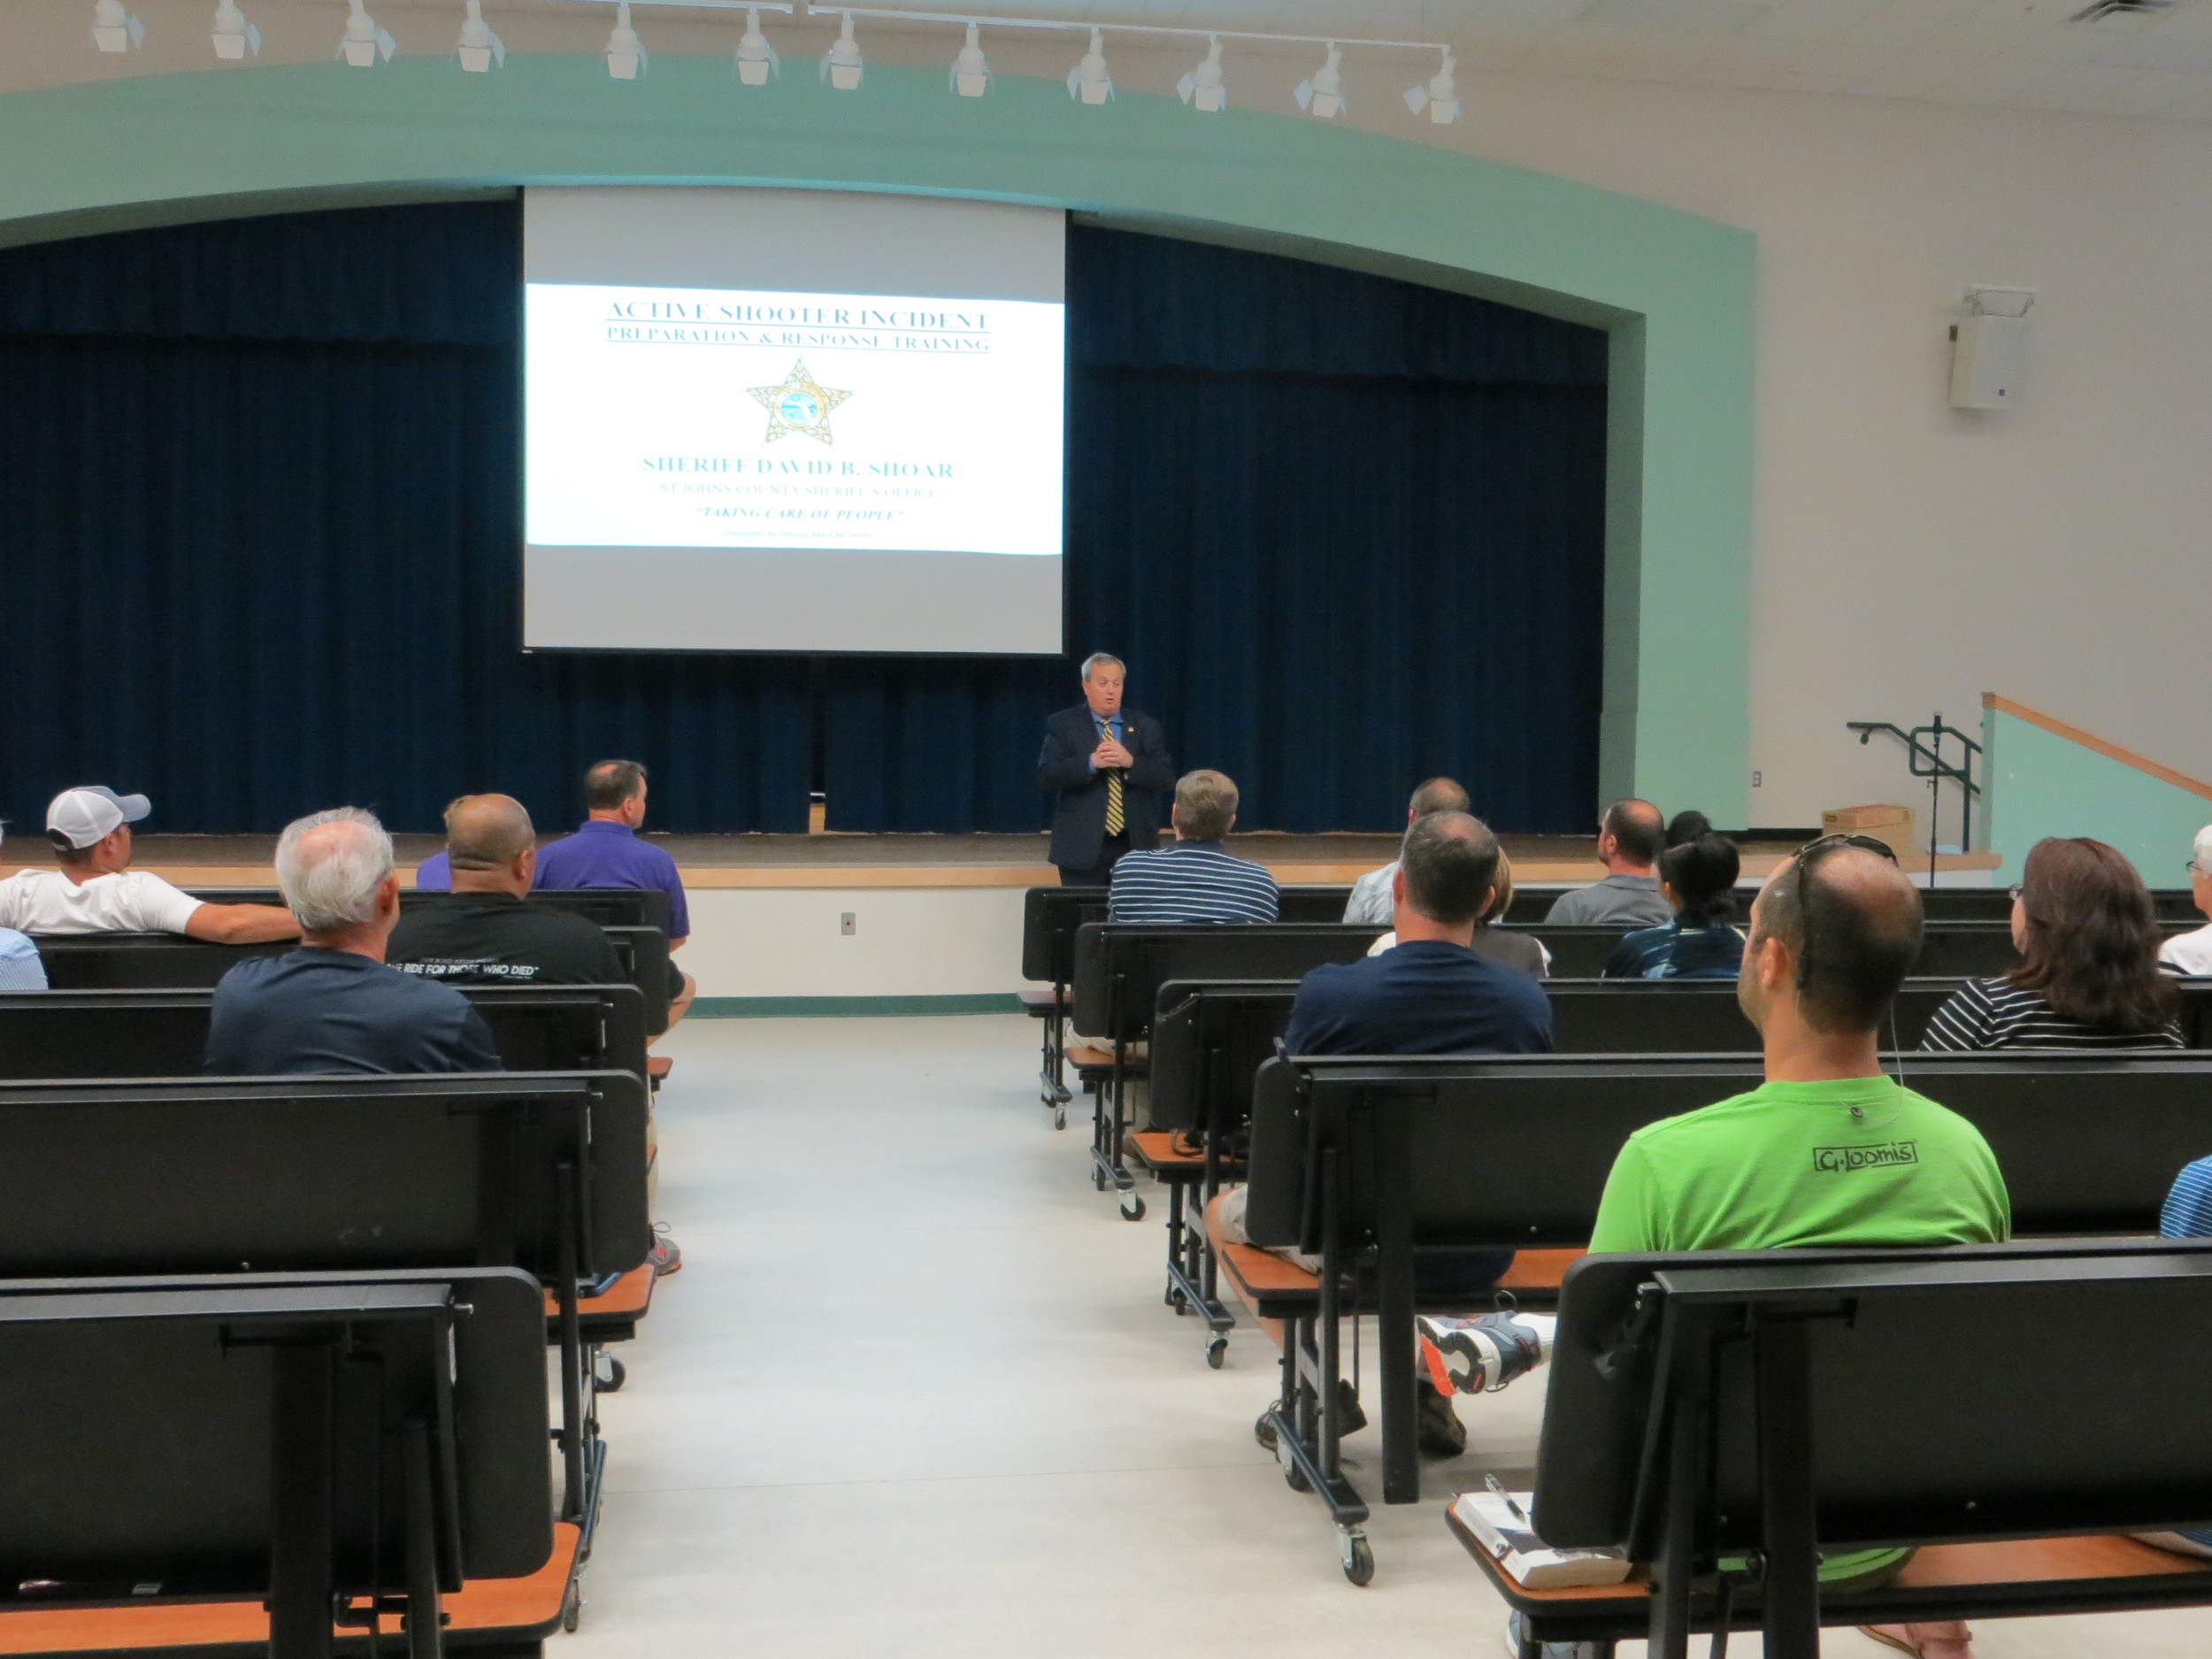 St. Johns County Sherriff David B. Shoar talks to a group of about 20 members of the community who turned out for the first in a series of Active Shooting Incident Seminars to be held throughout the county.